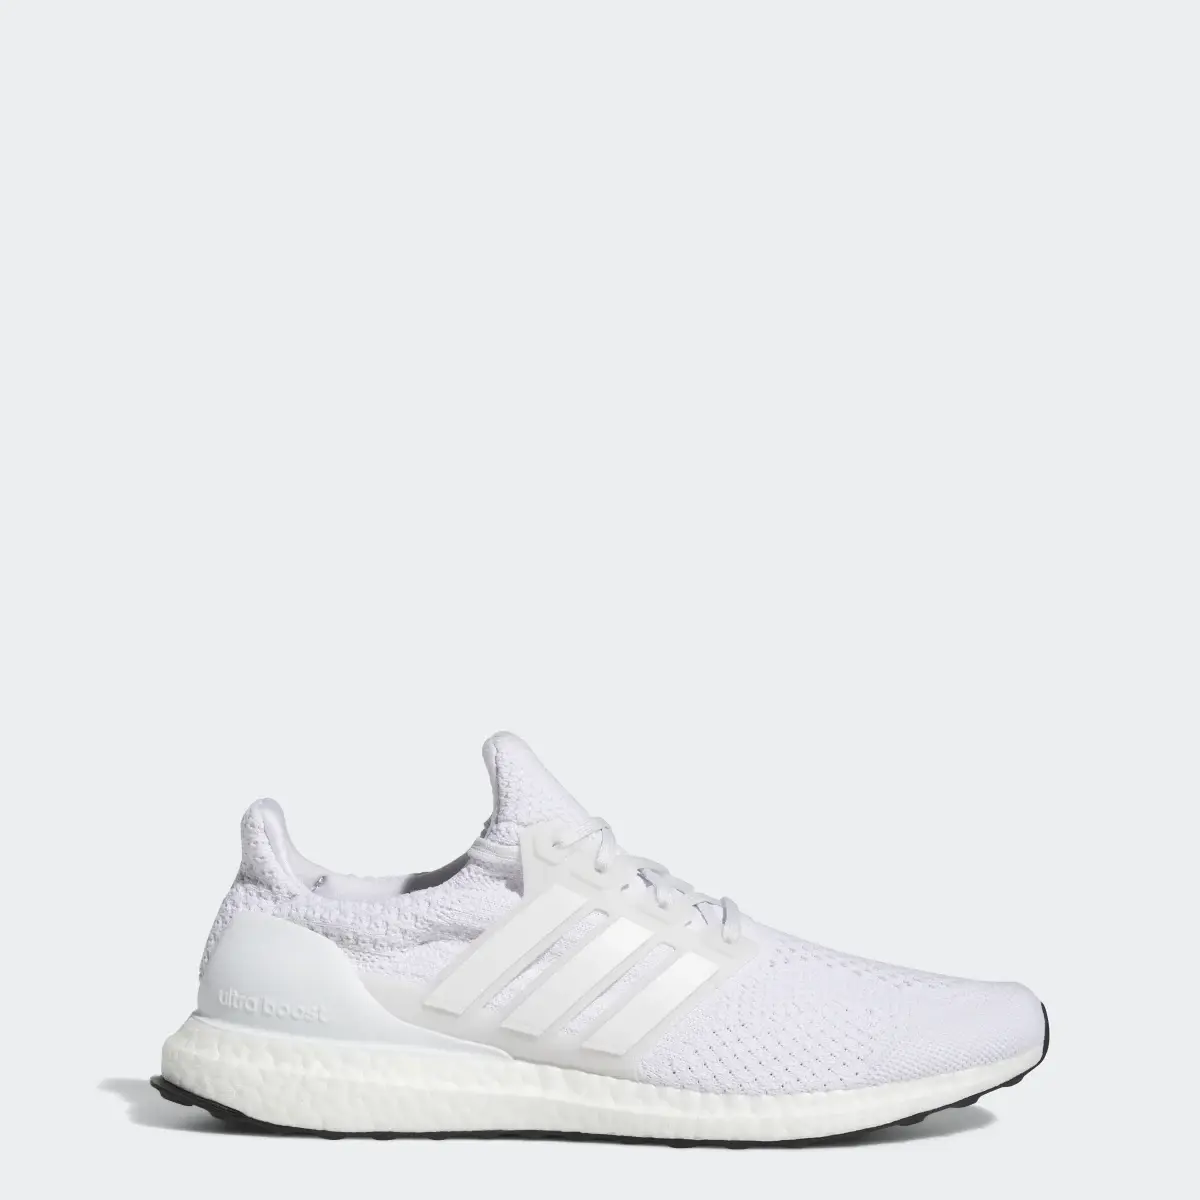 Adidas Ultraboost DNA 5.0 Shoes. 1